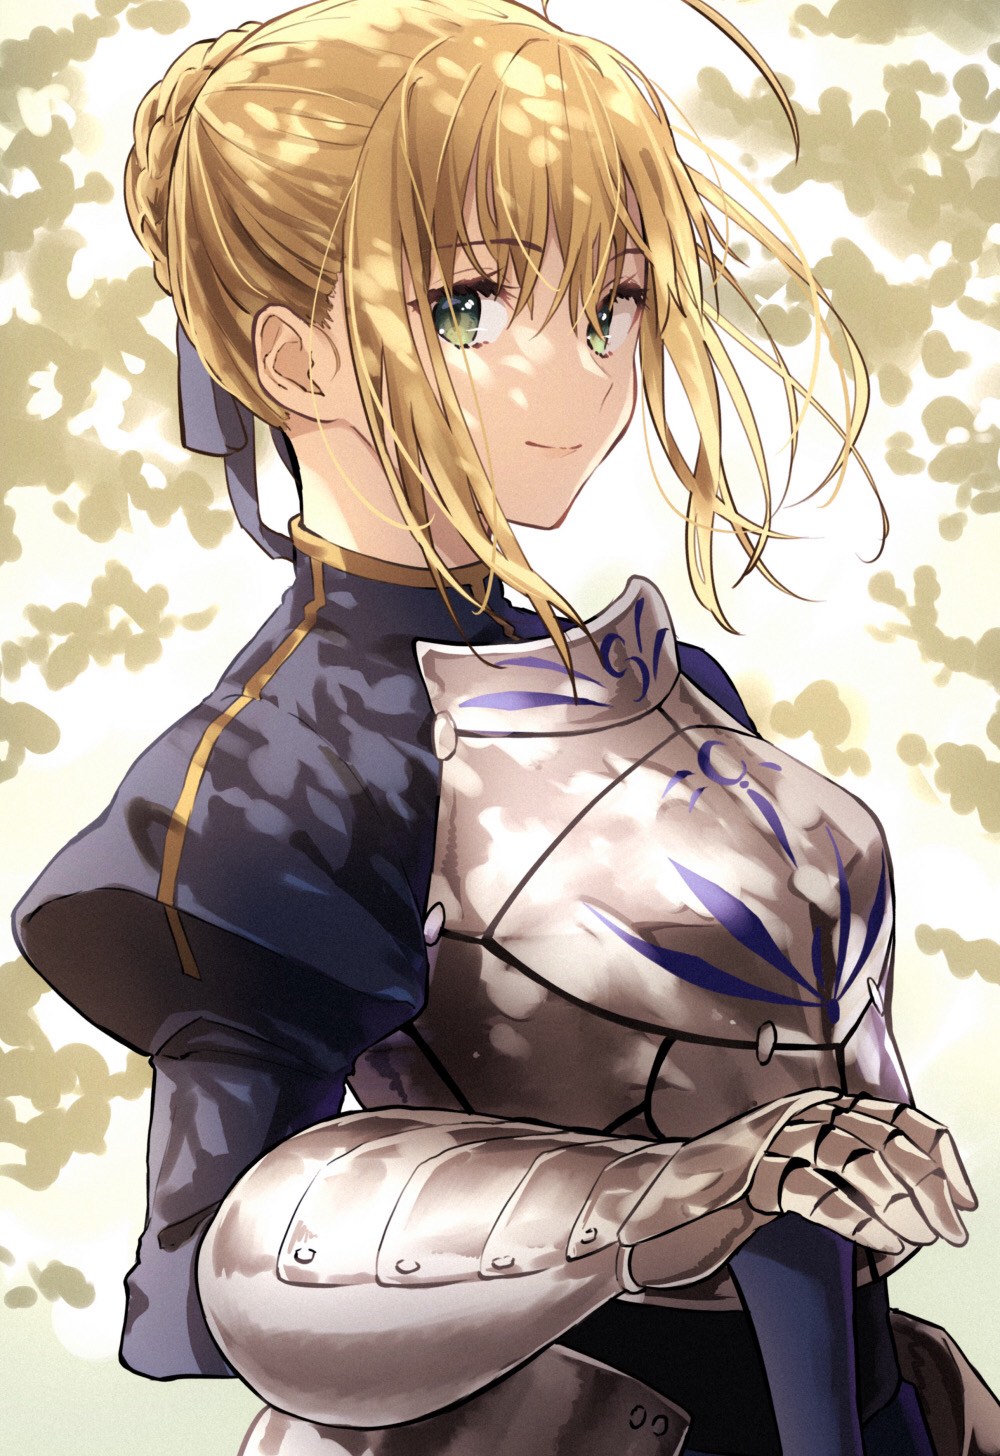 Fate Series FGO Fate Stay Night Anime Girls 2D Women With Swords Armor Female Warrior Excalibur Long 1000x1456